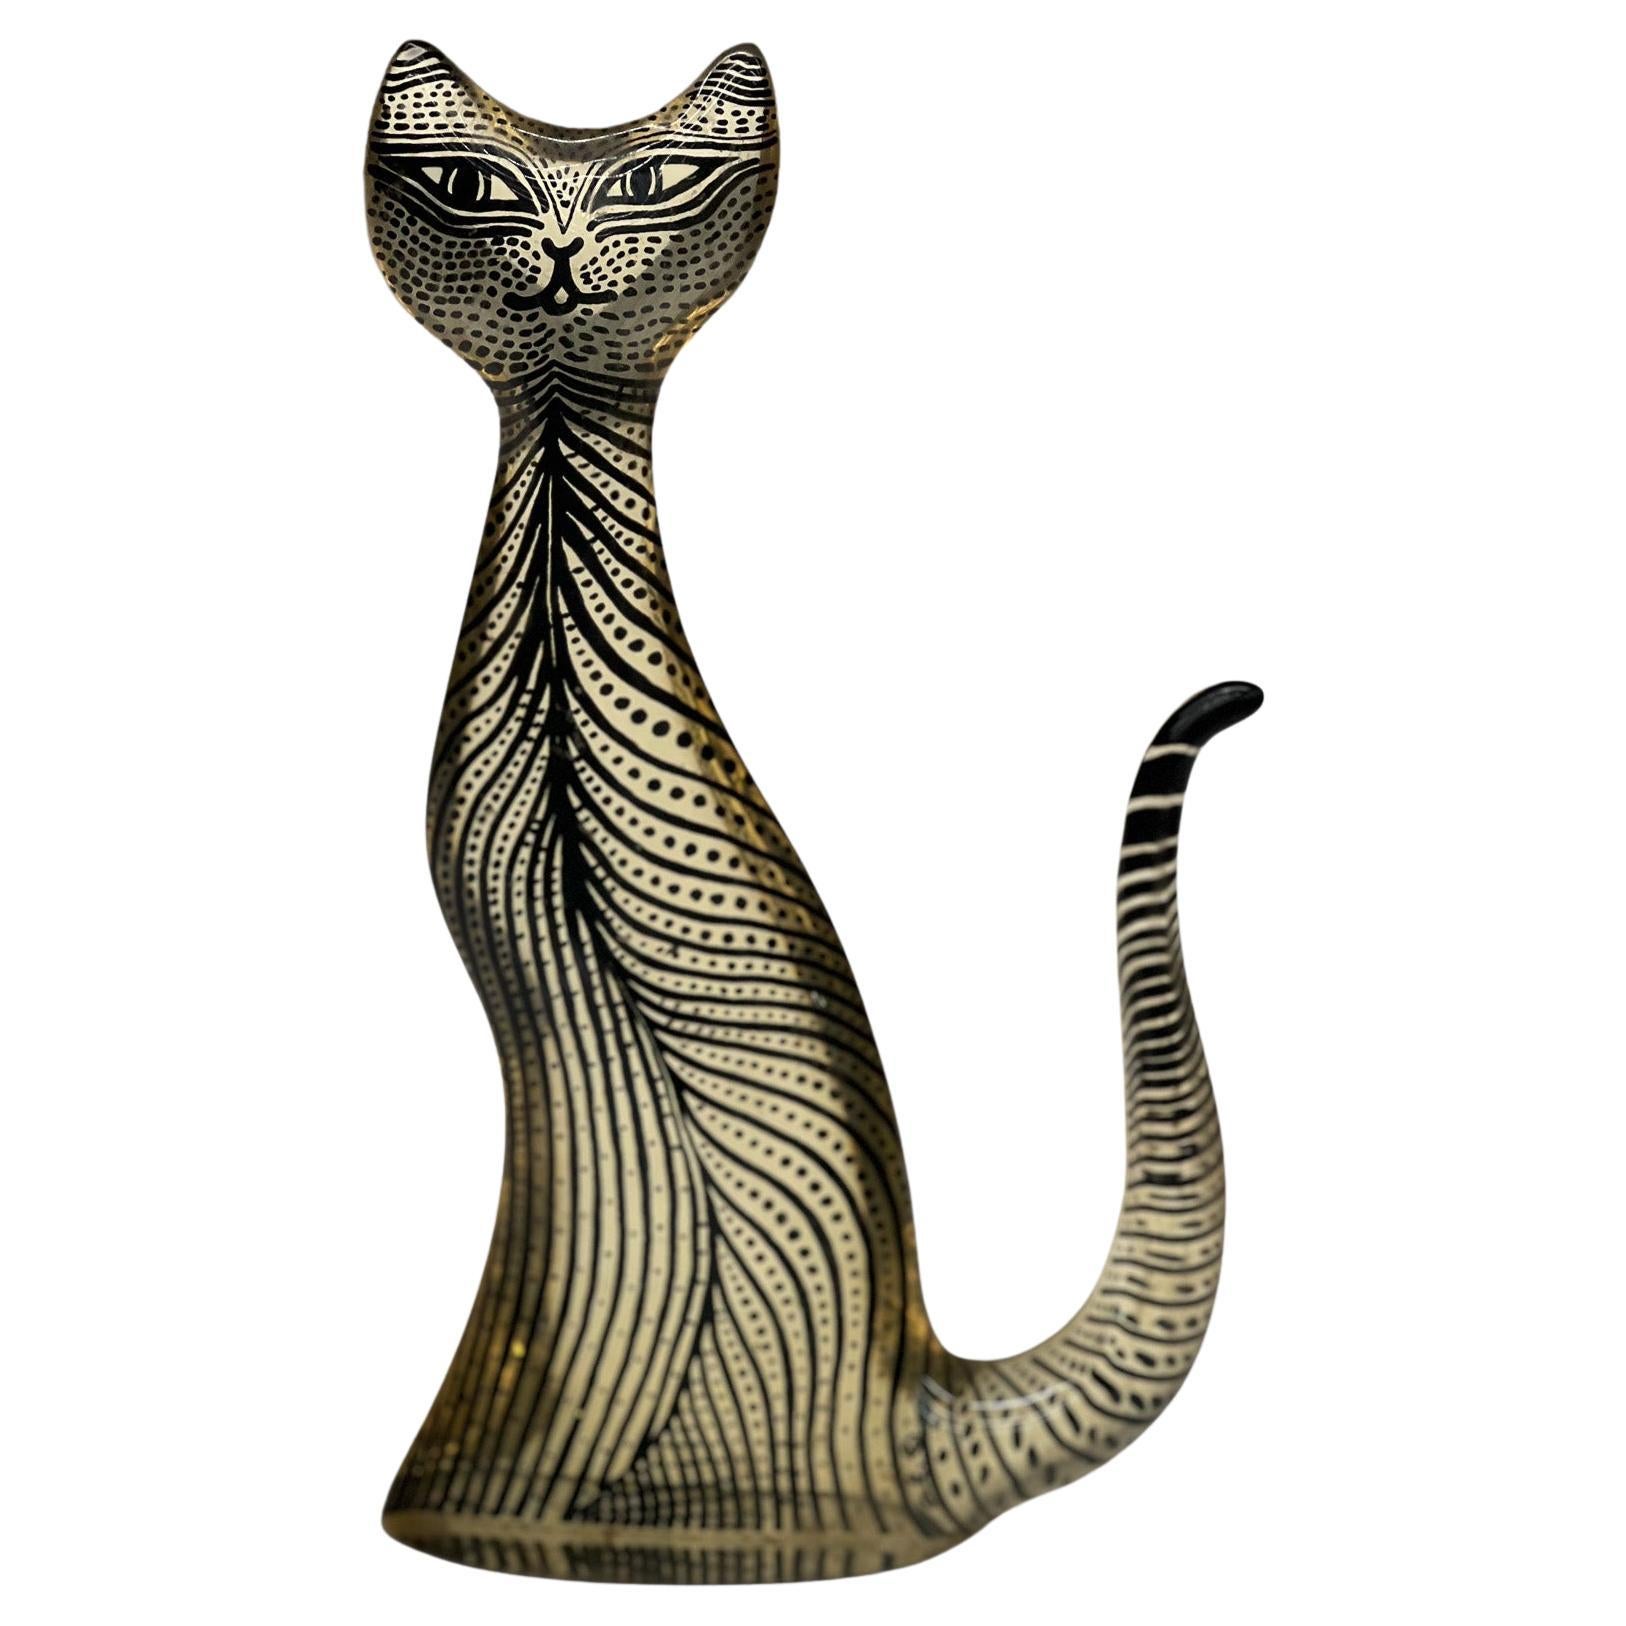 Brazilian Modern Kinetic Sculpture of a Cat in Resin, Abraham Palatinik, 1960s For Sale